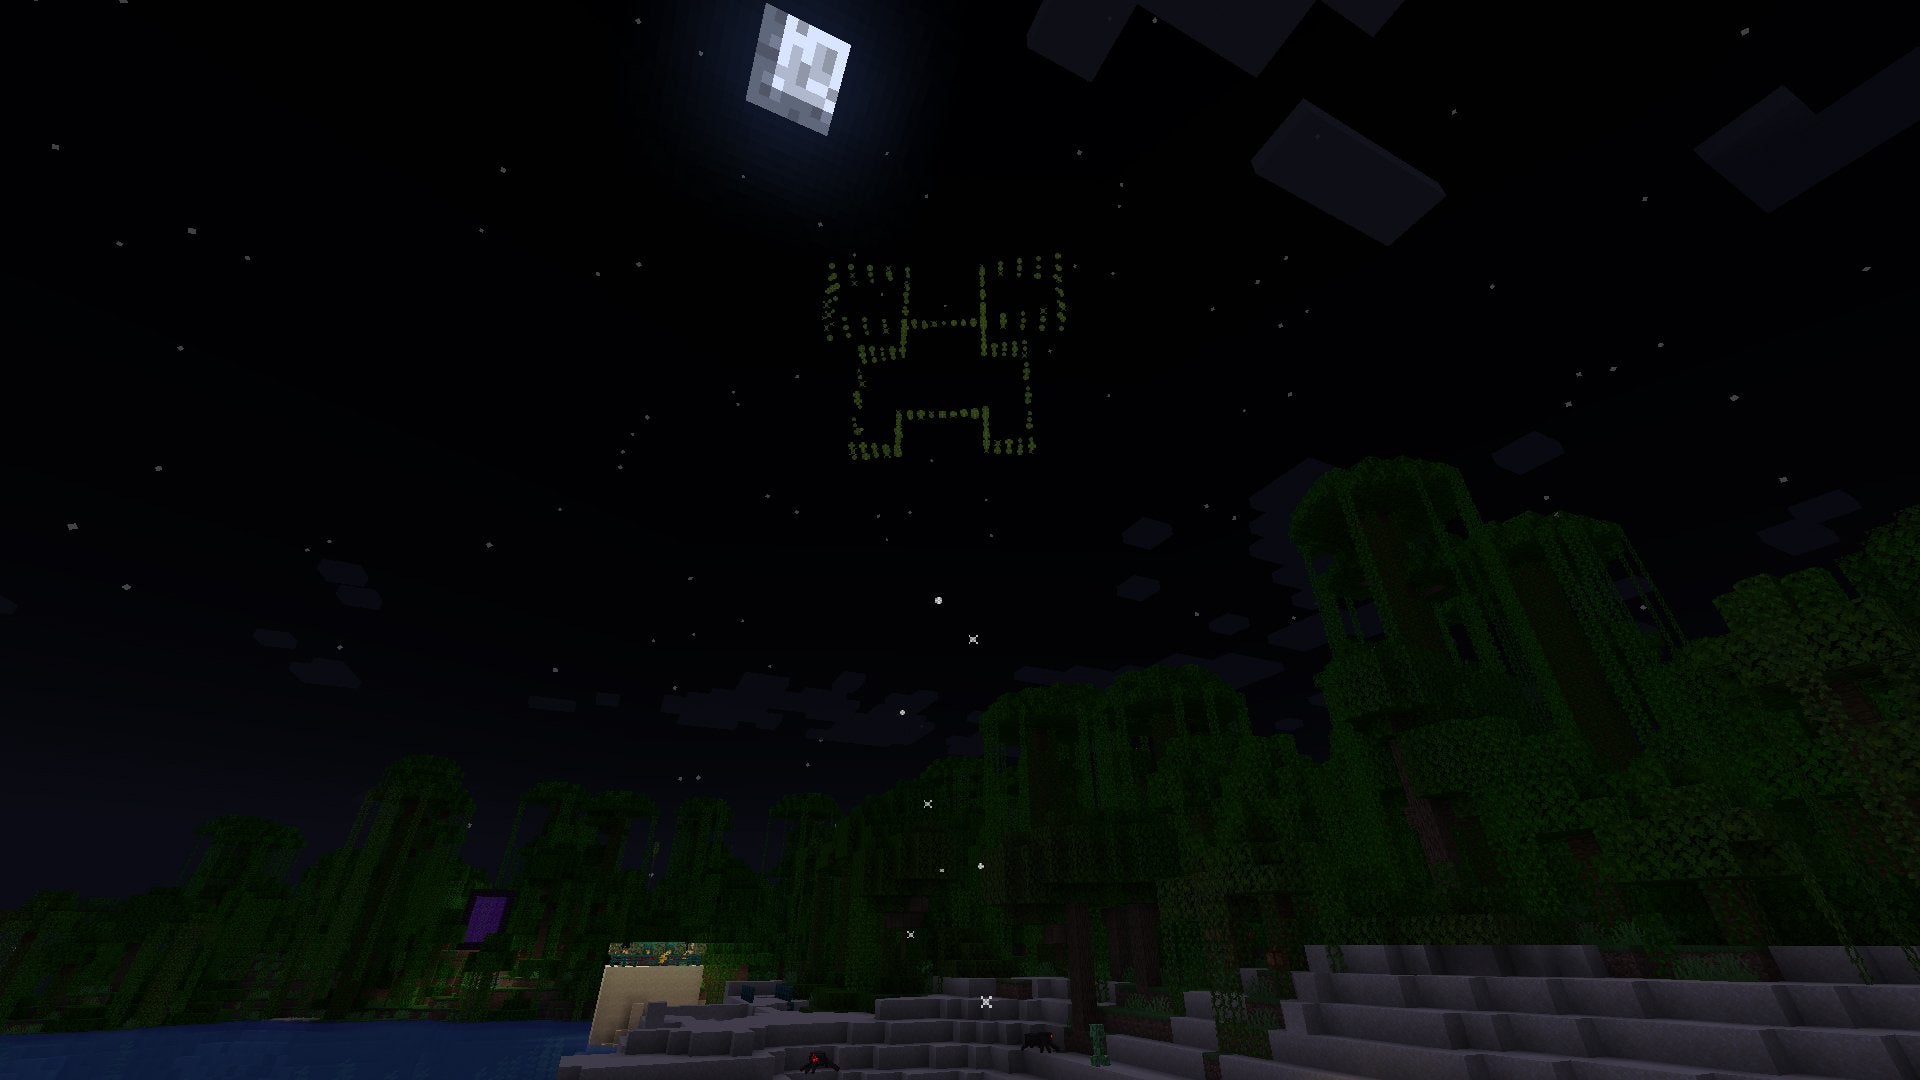 A Firework Star shaped like a Creeper's face exploding at night.